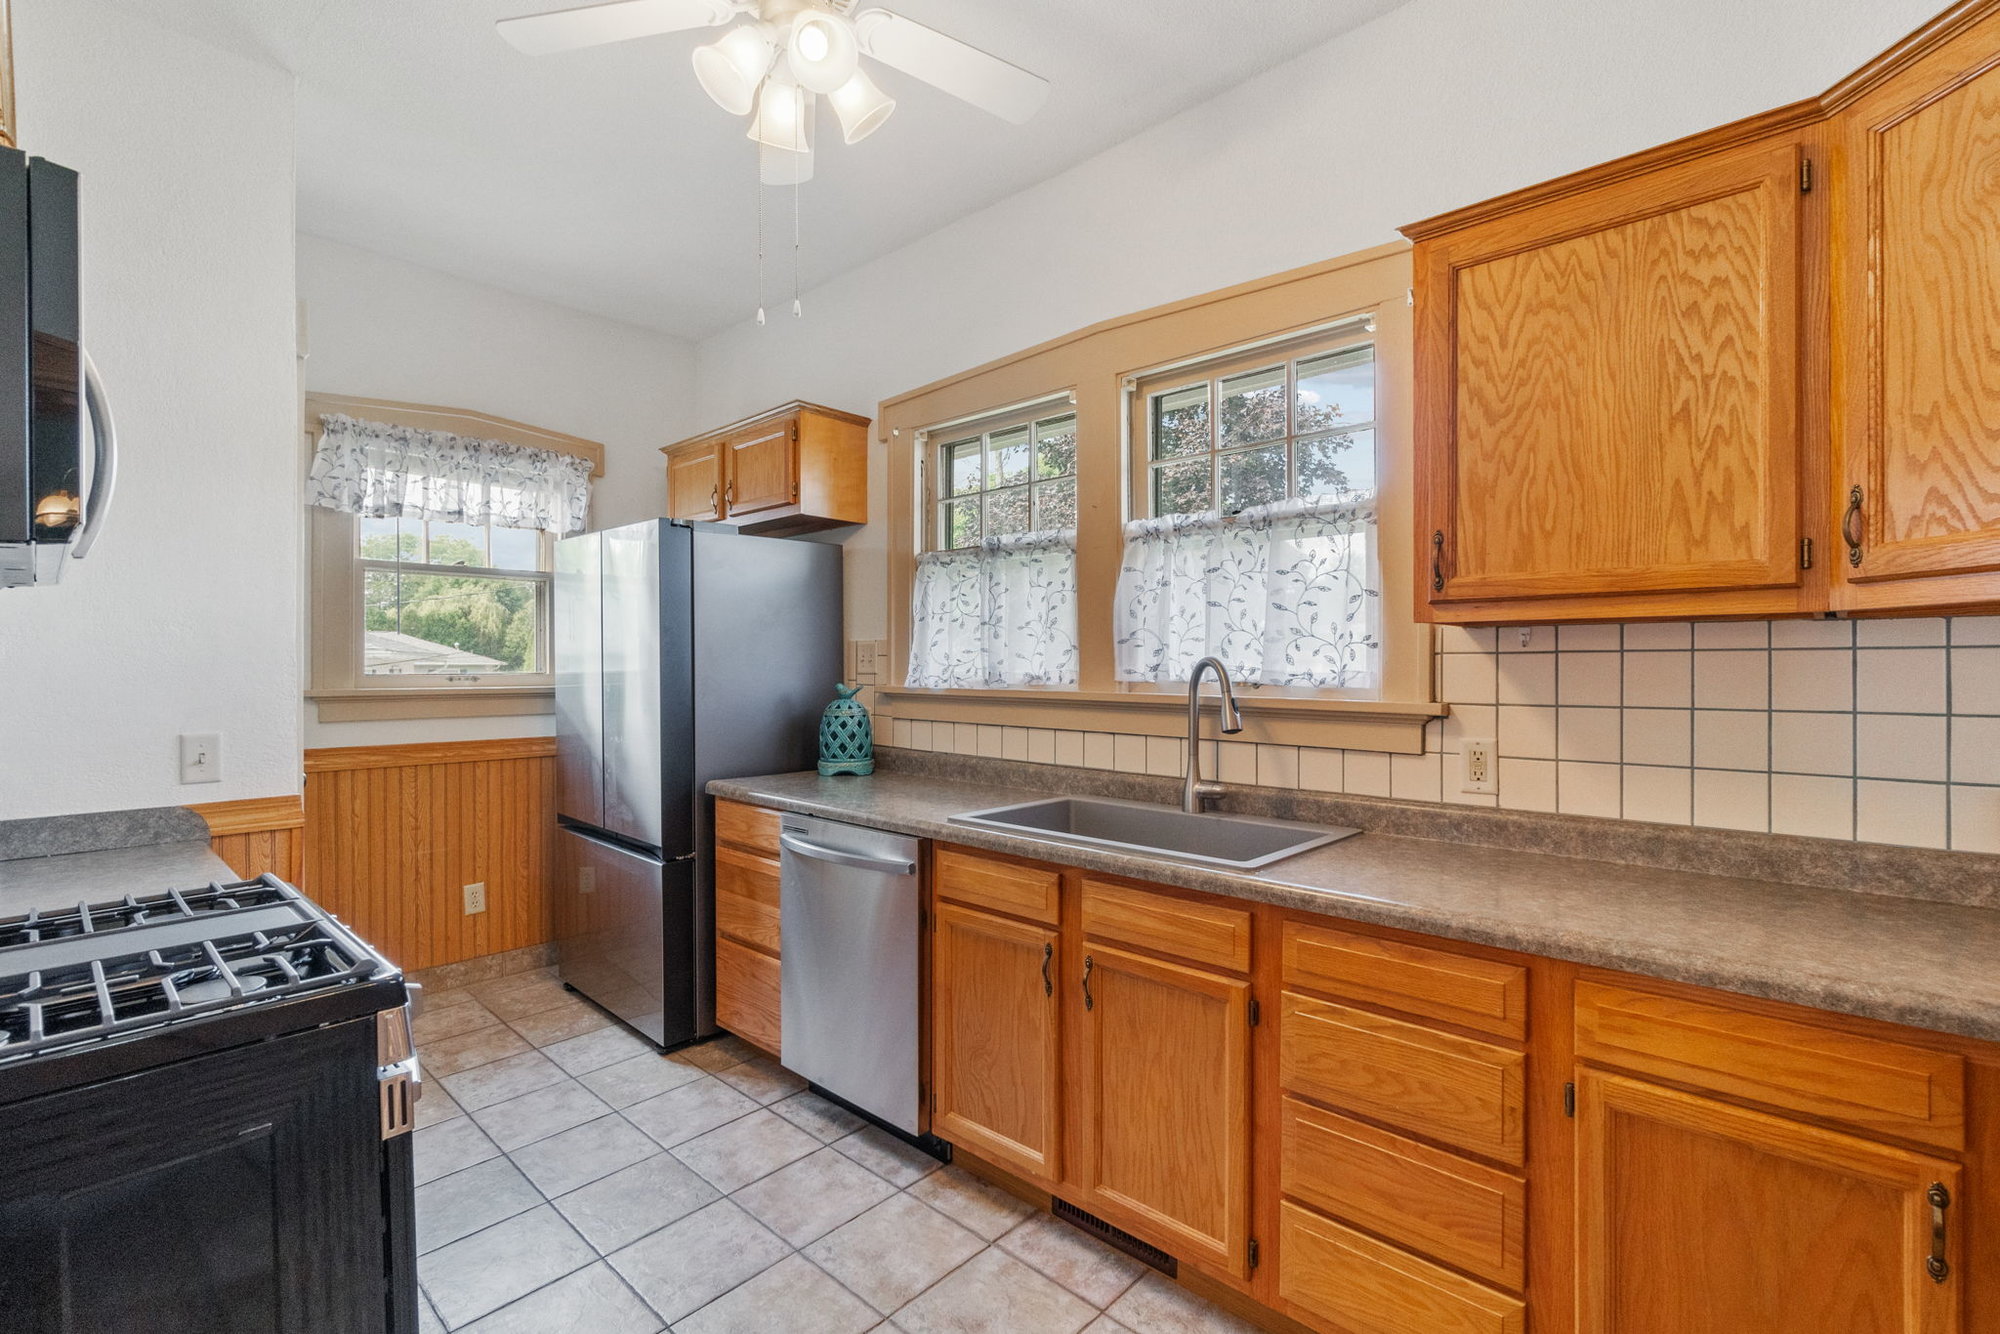 Tucked Back off Ridgeway Ave You will Find this Adorable Bungalow